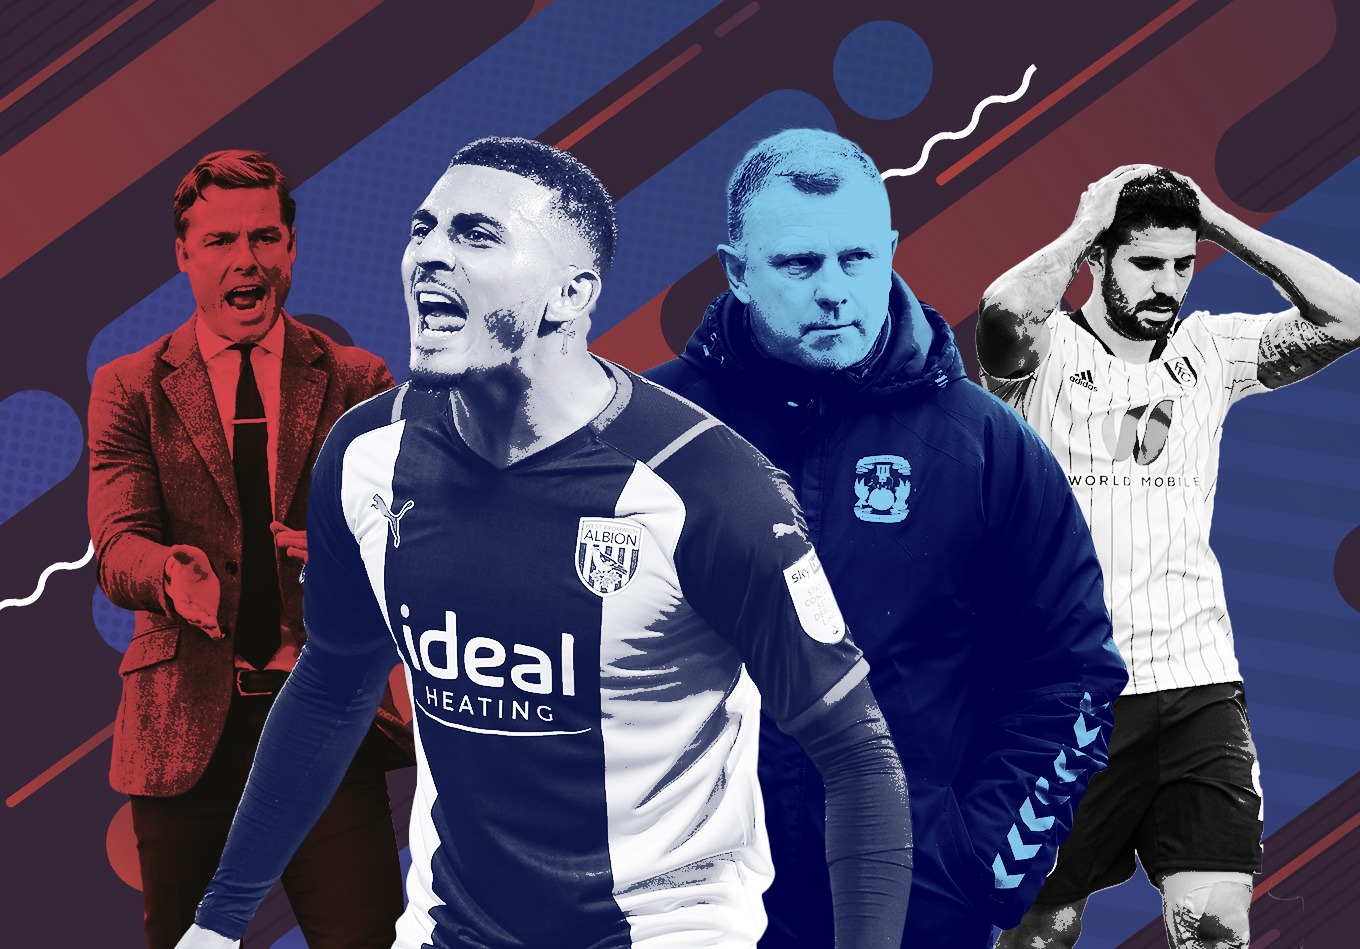 Mitrović the Cheat Code, Bournemouth’s Pressing, Val-Ball & More: Key Talking Points Ahead of the Championship’s Return